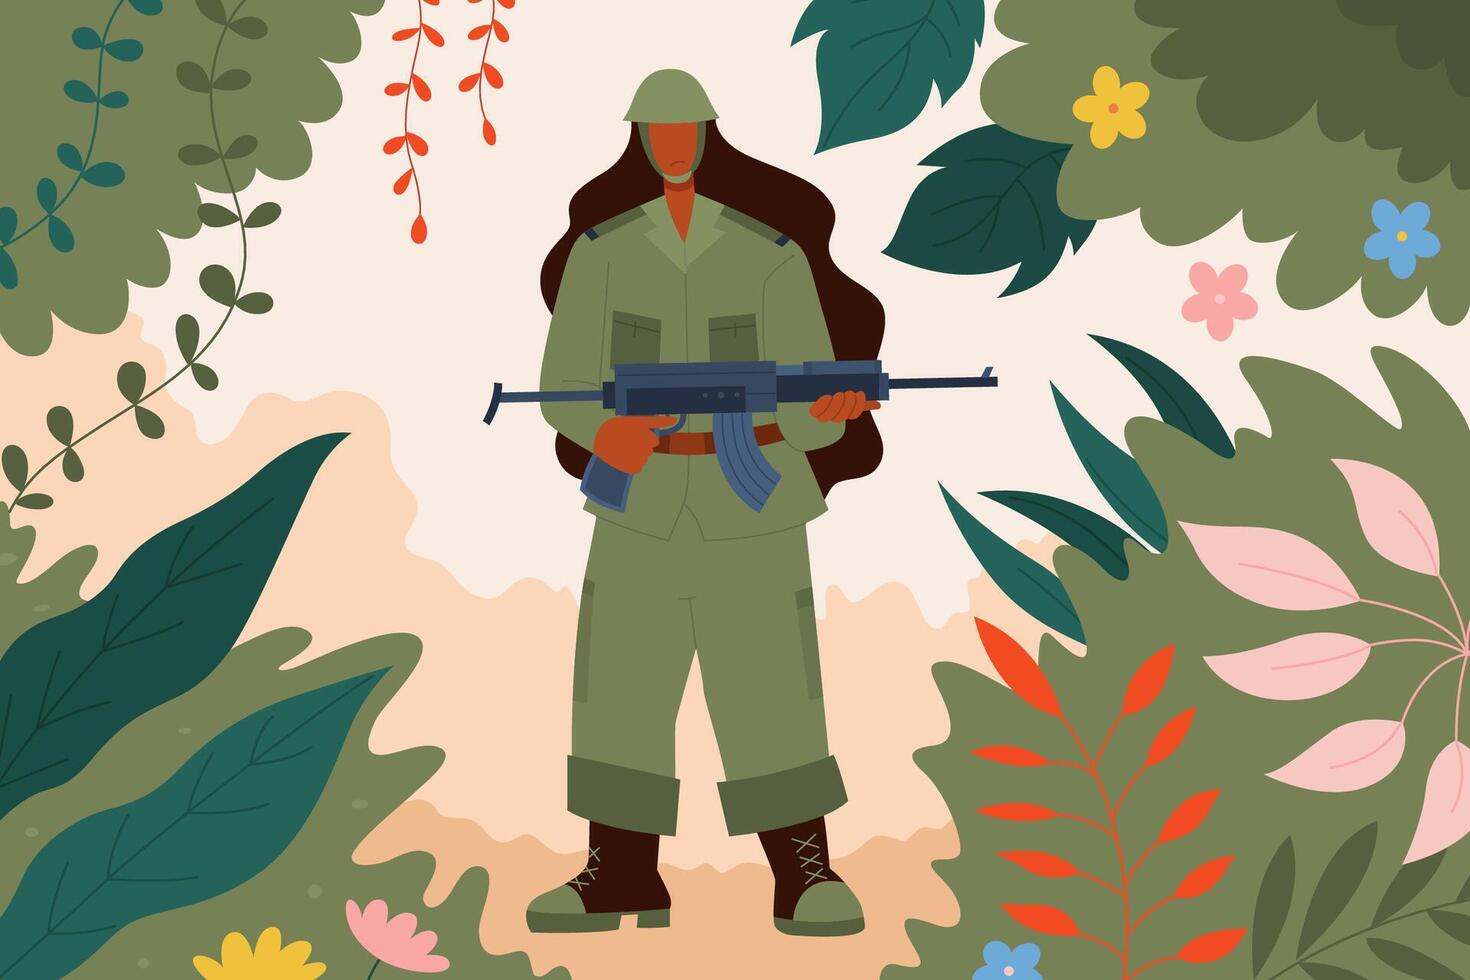 Female ground force at work. Flat style illustration of a woman in military camouflage costume holding a rifle in the battlefield filled with bushes vector